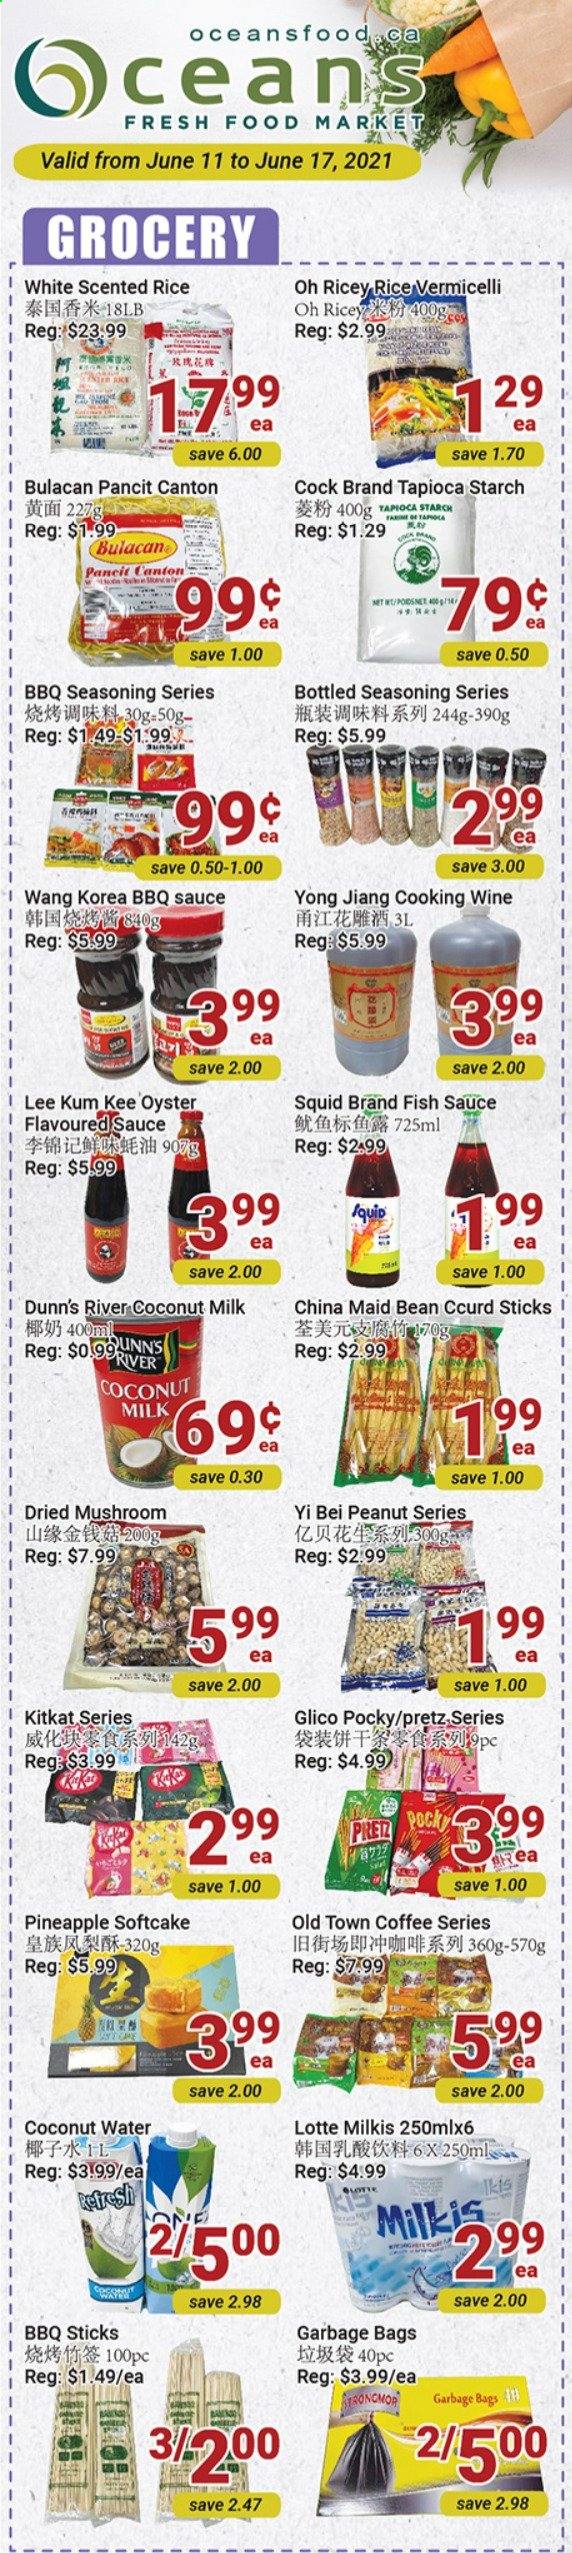 thumbnail - Oceans Flyer - June 11, 2021 - June 17, 2021 - Sales products - mushrooms, pineapple, squid, oysters, fish, sauce, KitKat, starch, tapioca starch, coconut milk, rice, rice vermicelli, spice, BBQ sauce, fish sauce, Lee Kum Kee, coconut water, coffee, cooking wine, bag. Page 1.